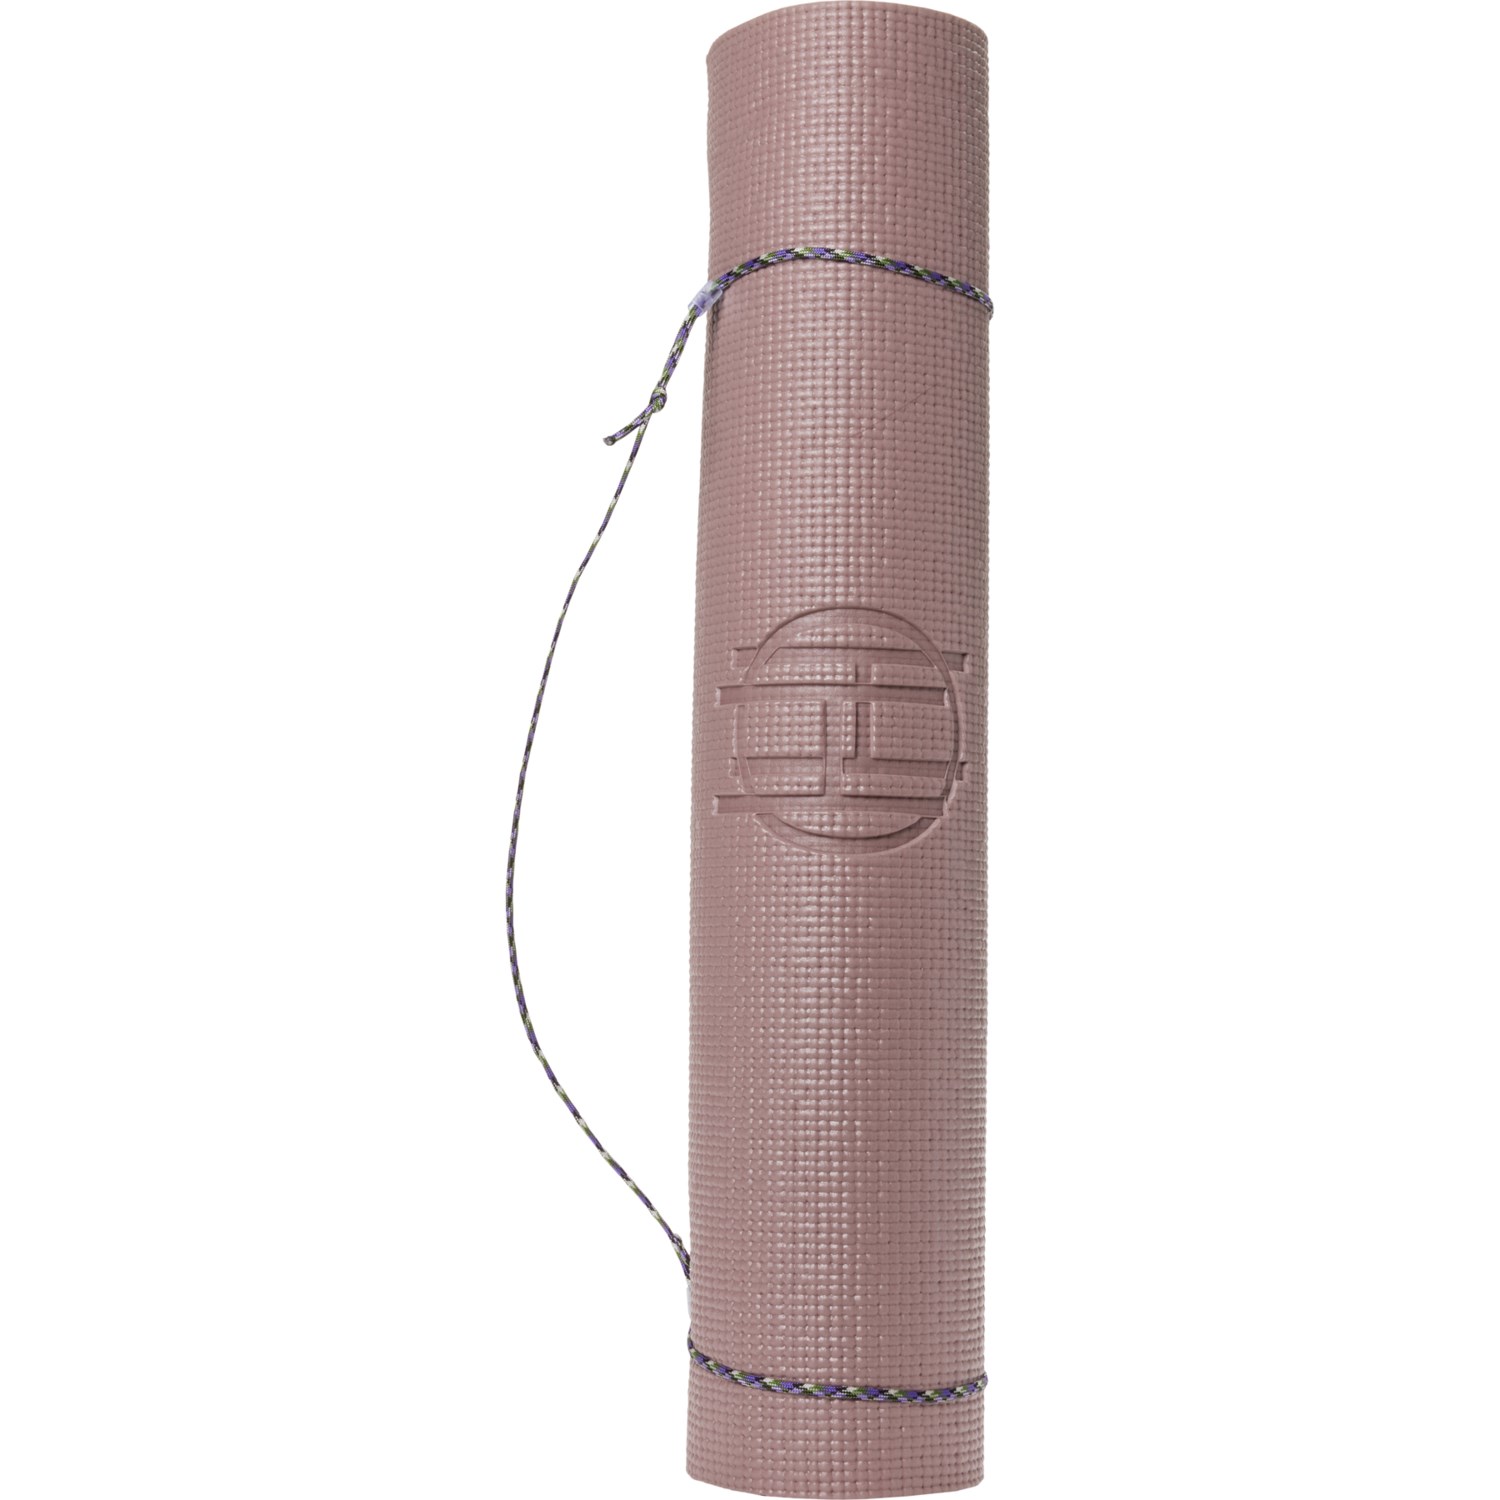 House of Harlow 1960 Pro Ridged Surface Yoga Mat - 24x68”, 10 mm - Save 31%